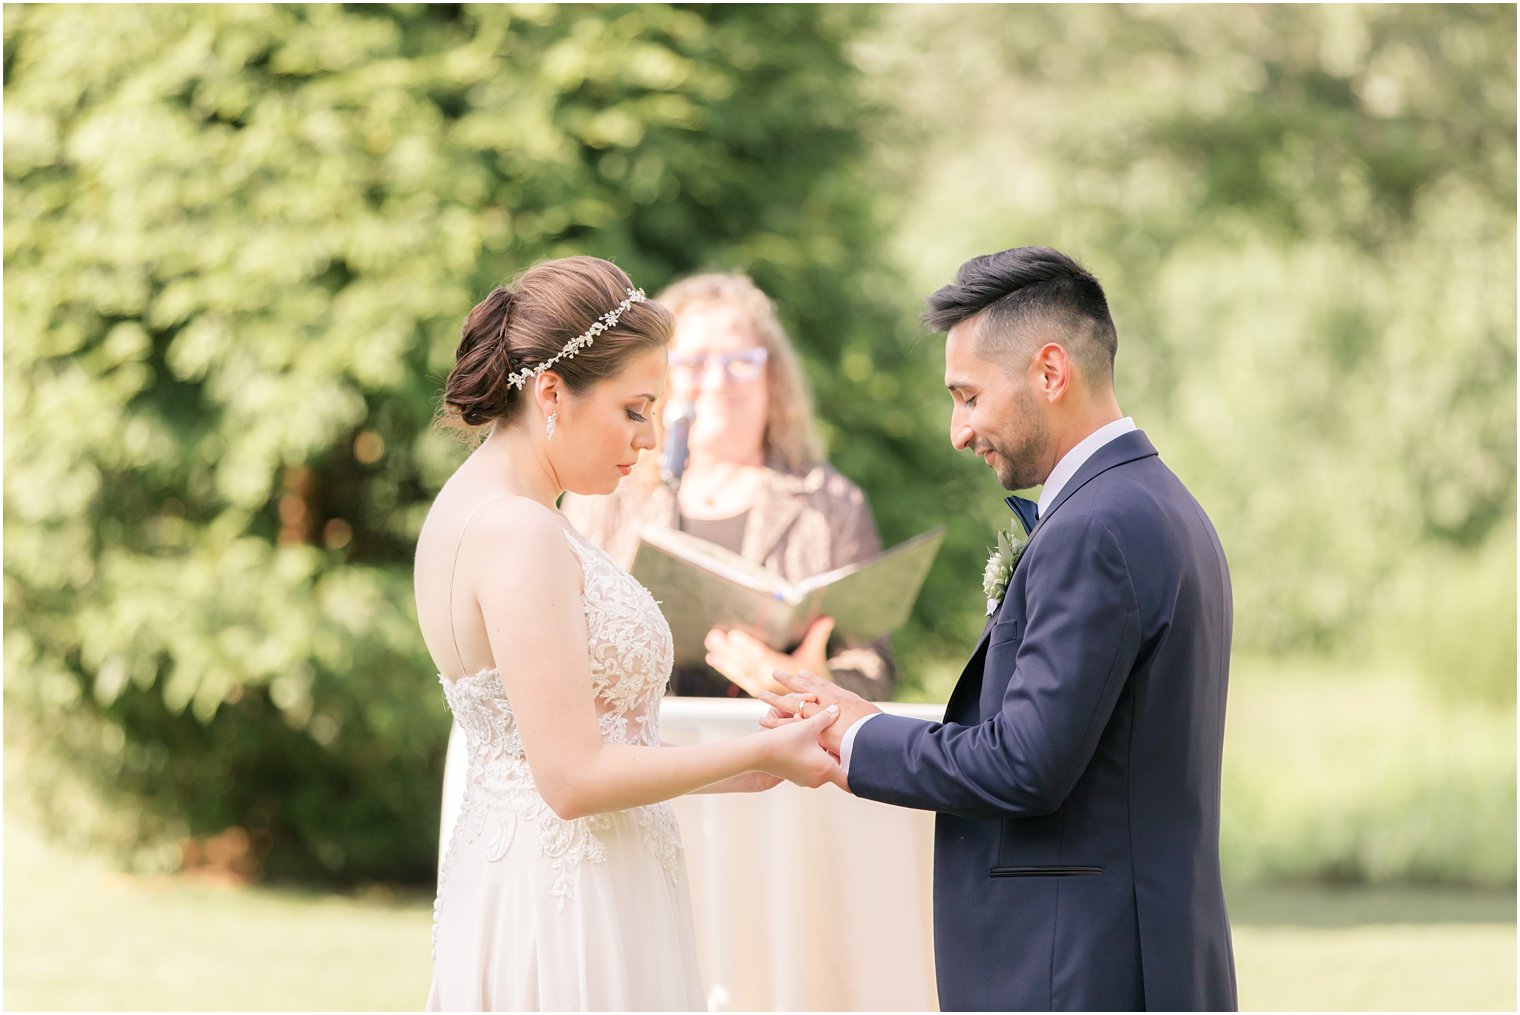 Ring exchange at Outdoor wedding ceremony at Ninety Acres at Natirar in Peapack NJ